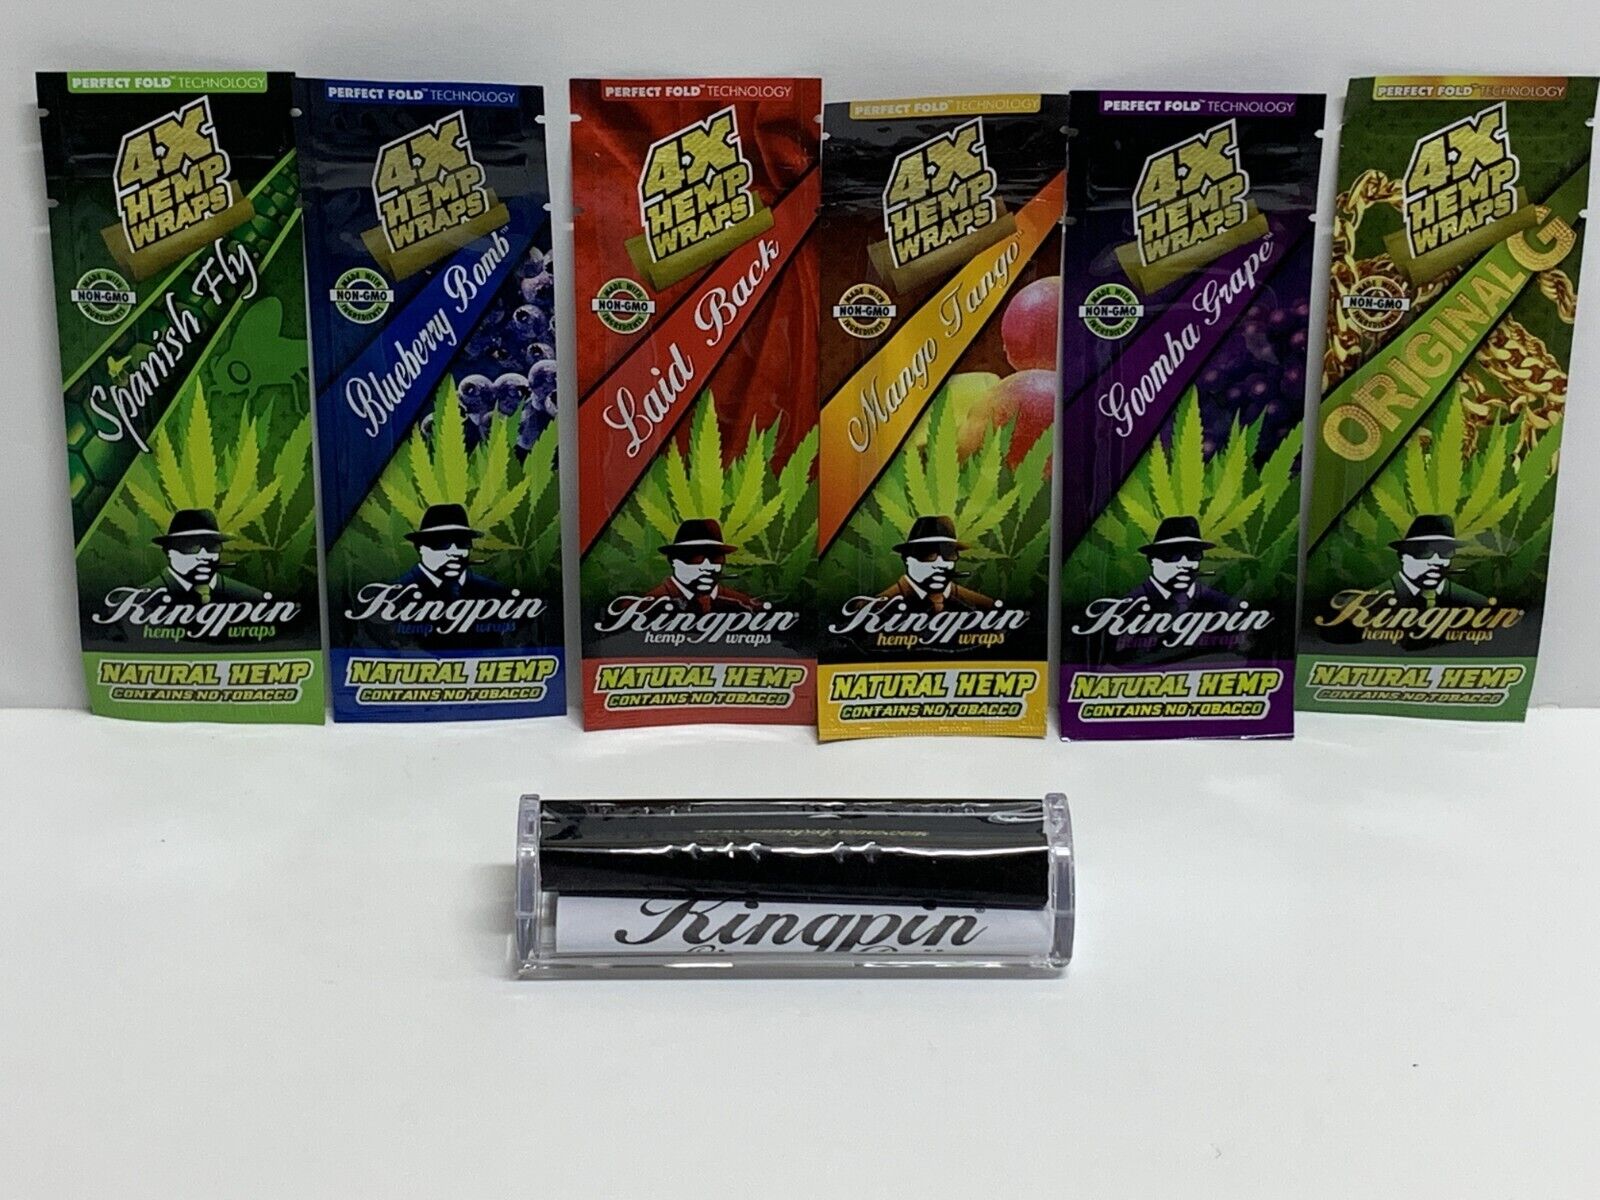 KINGPIN HERBAL WRAPS - 6 Pack Sampler with KINGPIN WRAP ROLLER w/instructions